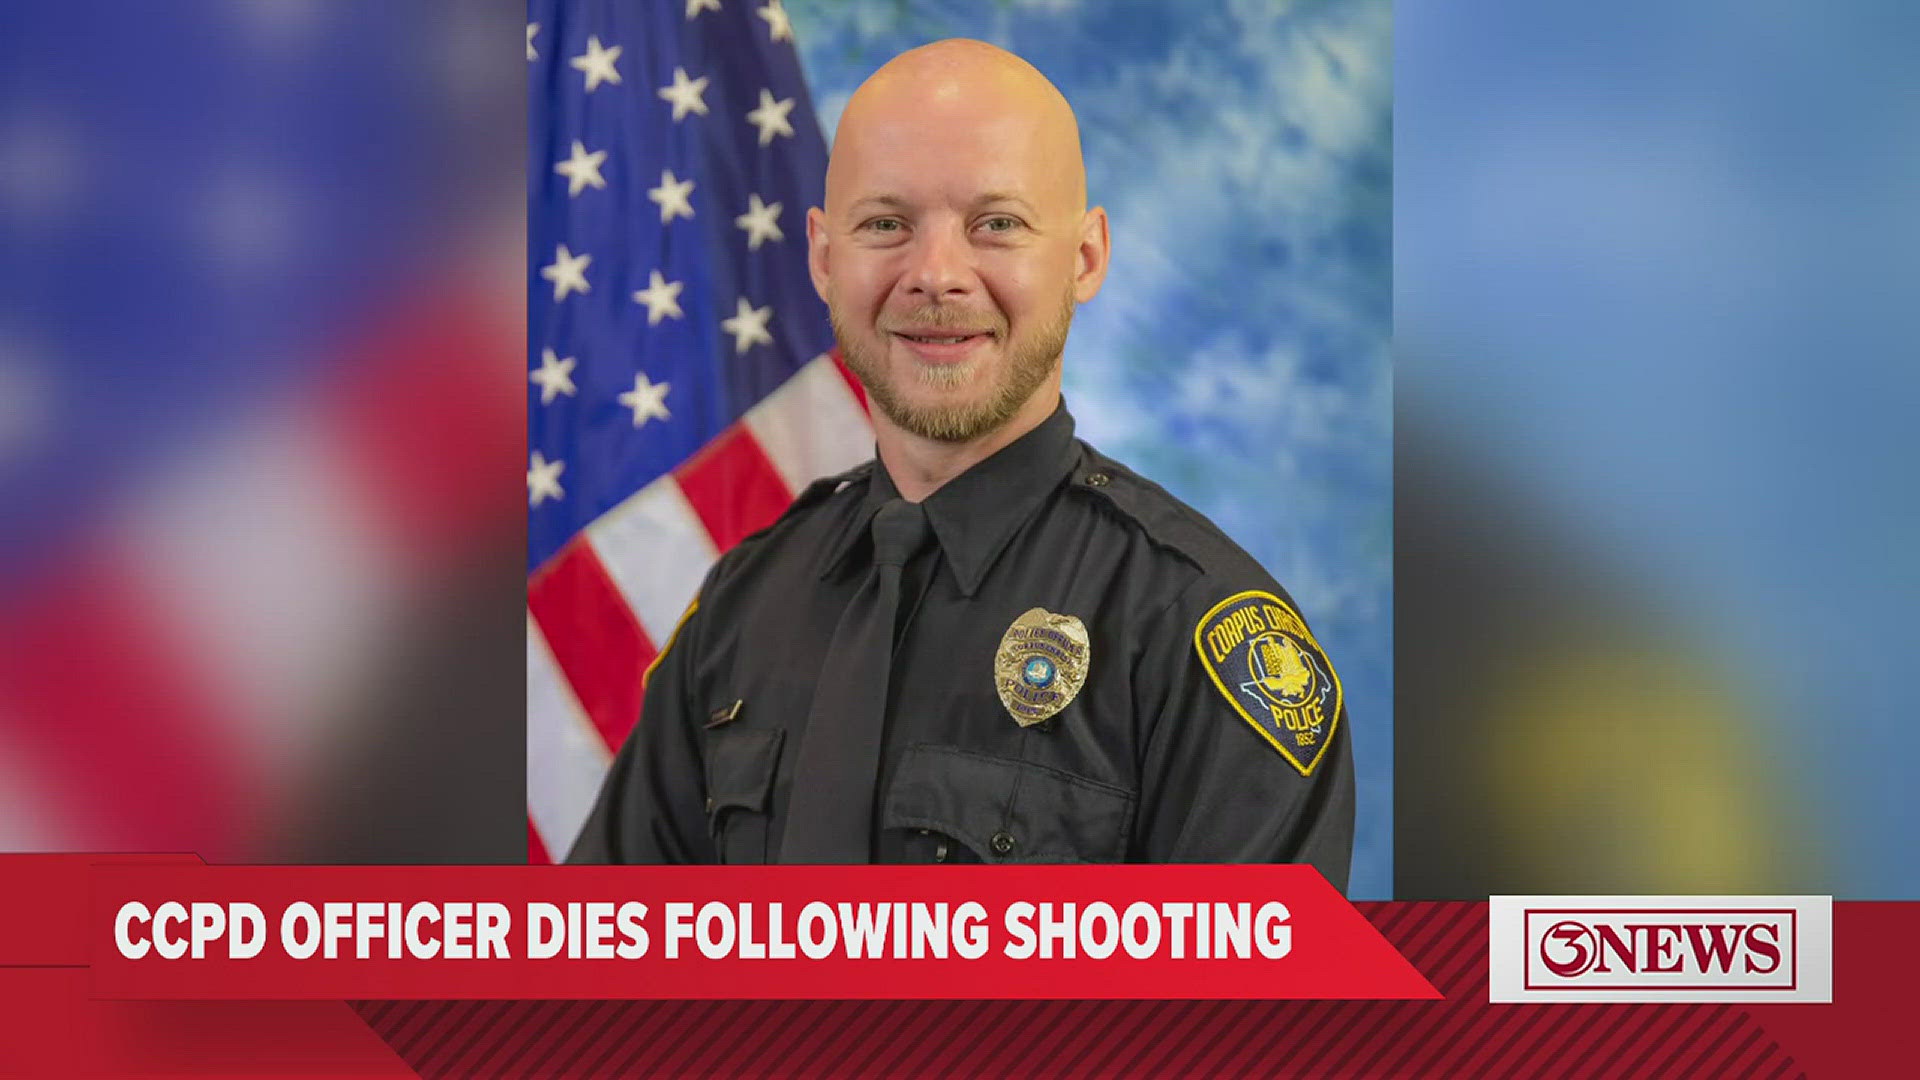 Officer Hicks was shot in the line of duty when responding to a domestic dispute early Saturday morning.